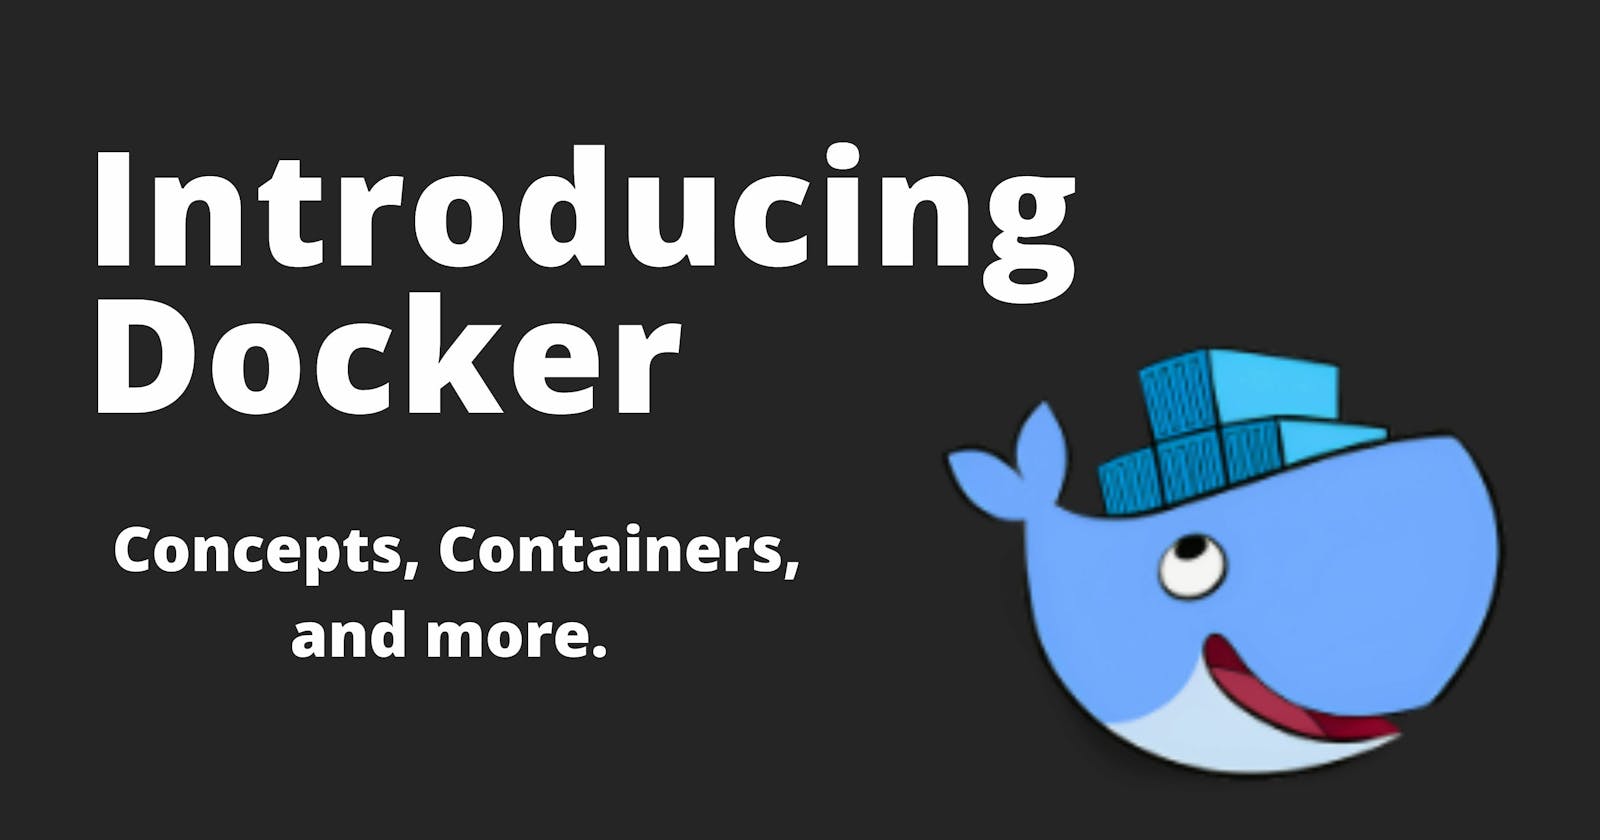 Introducing Docker Concepts, Containers, and more